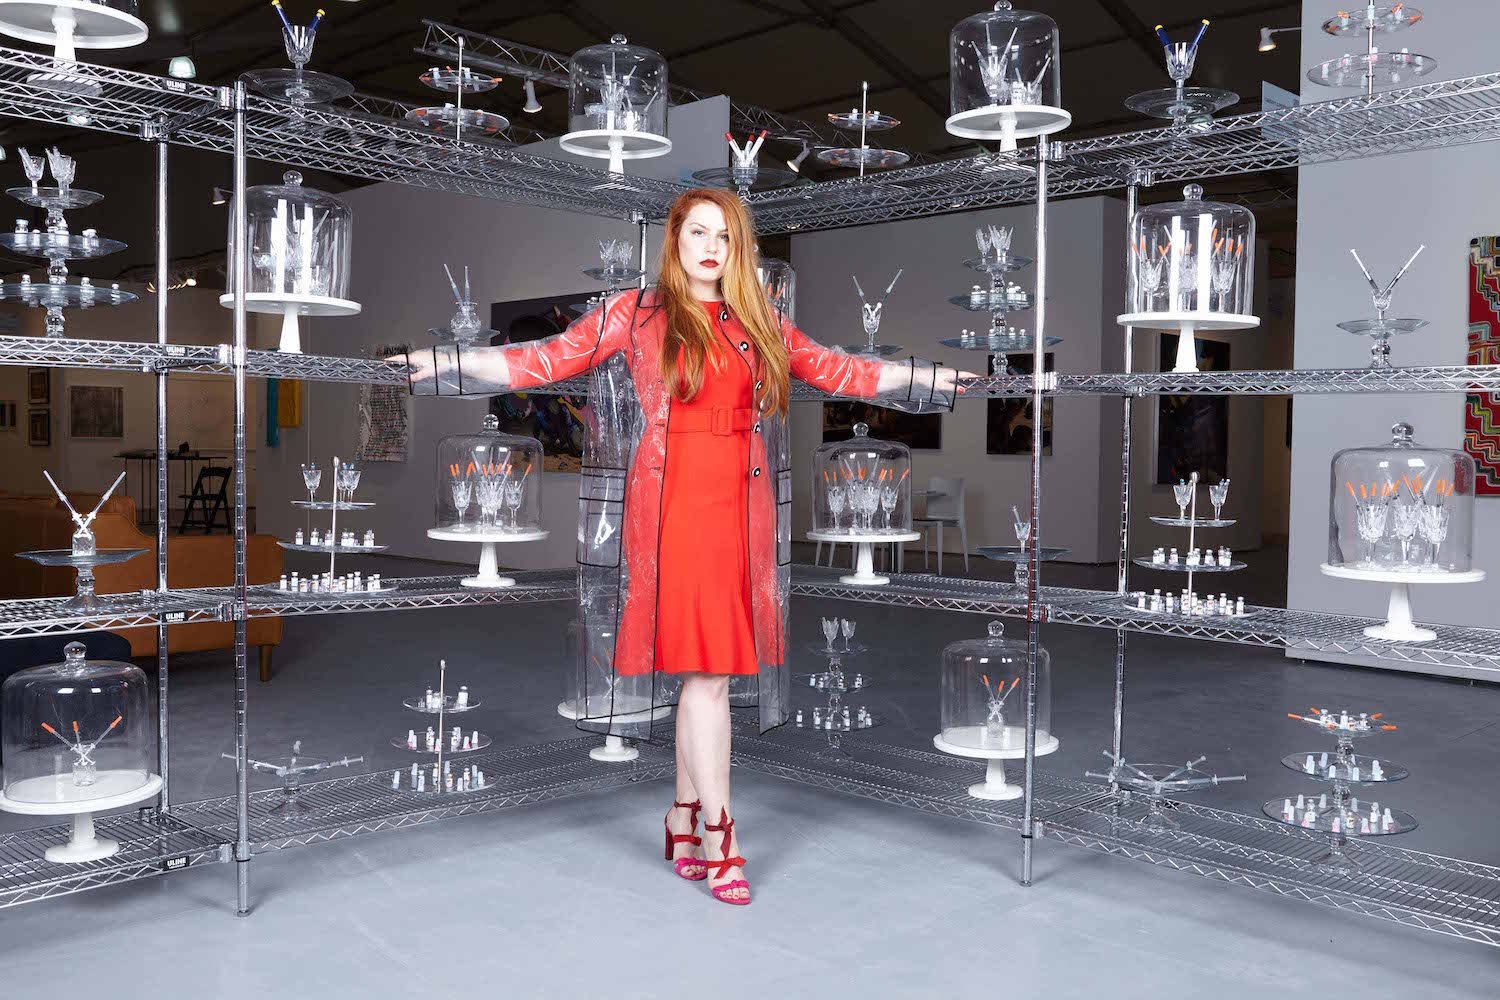 Baccarat Exhibits Collection During Miami Art Basel